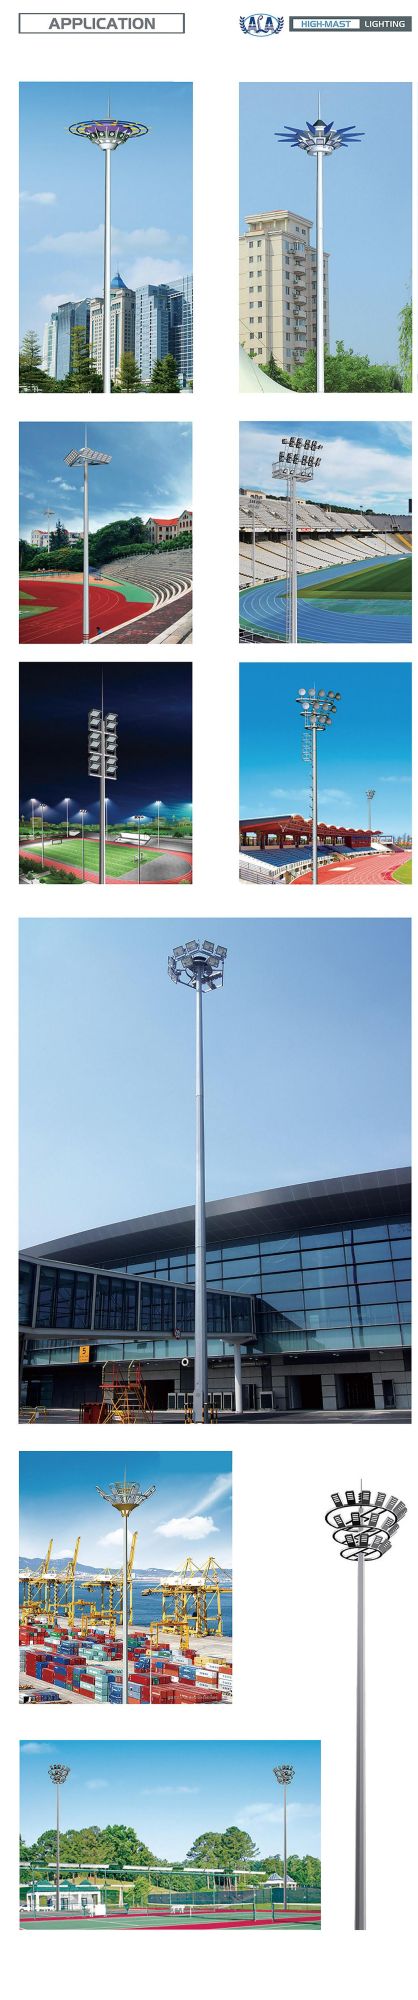 Ala High Brightness IP65 Outdoor Waterproof 100W Solar LED Flood Light Made by Molding High Quality Steel Plate